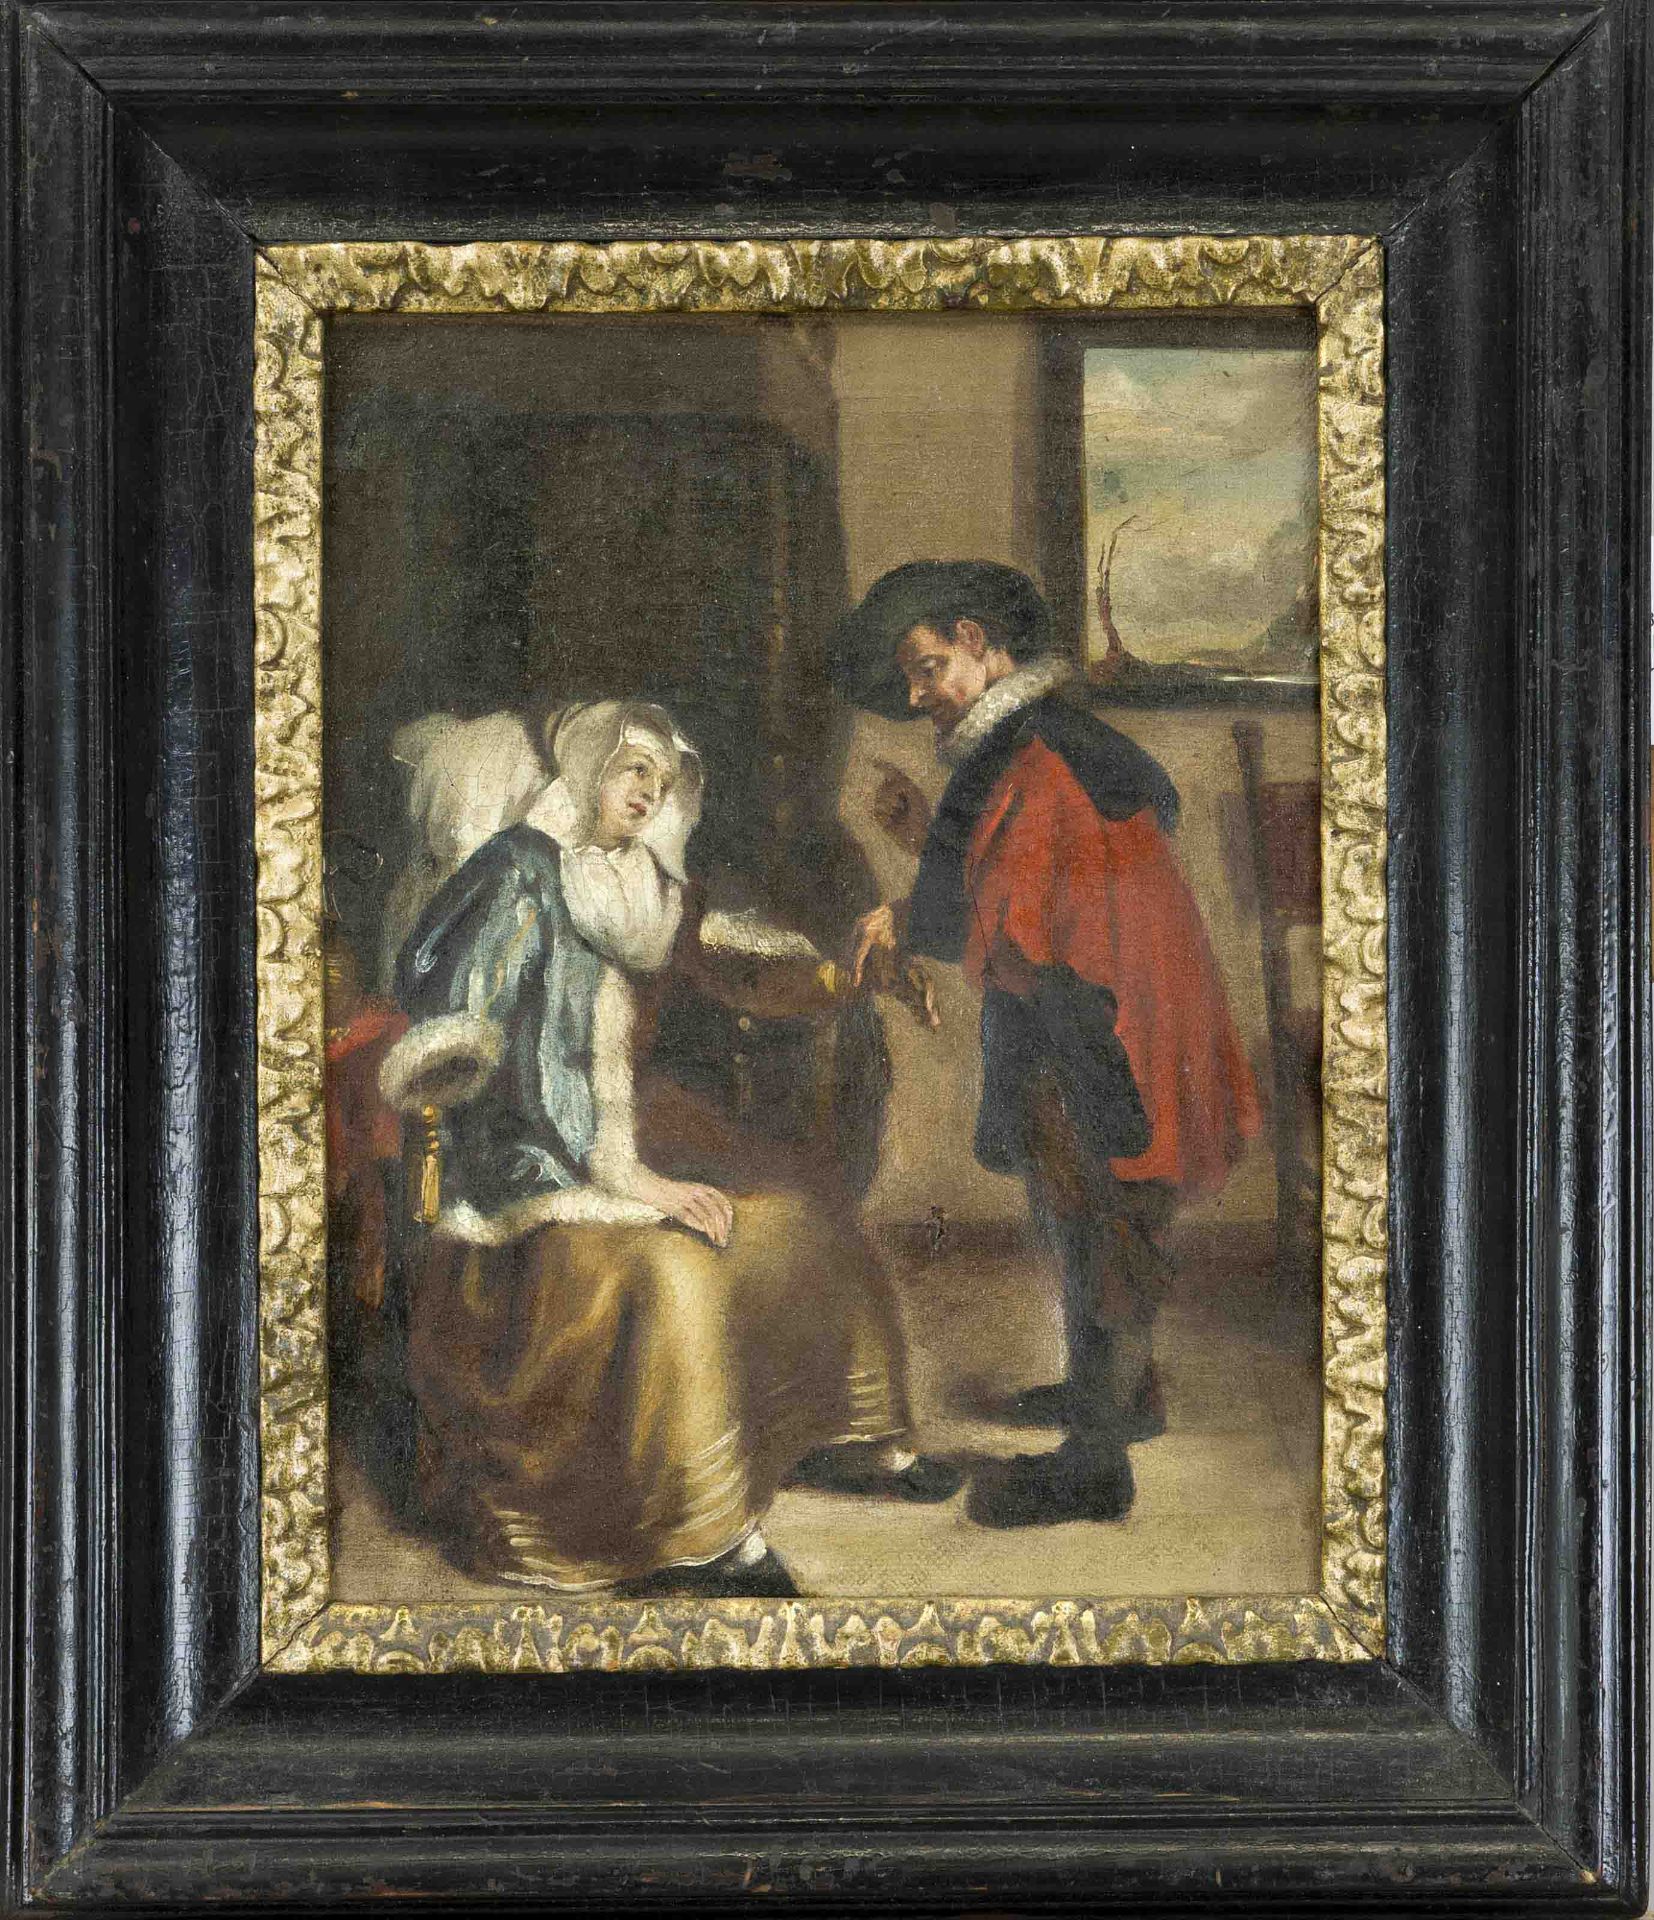 Anonymous genre painter of the 19th century, a doctor in the style of the 17th century, measuring